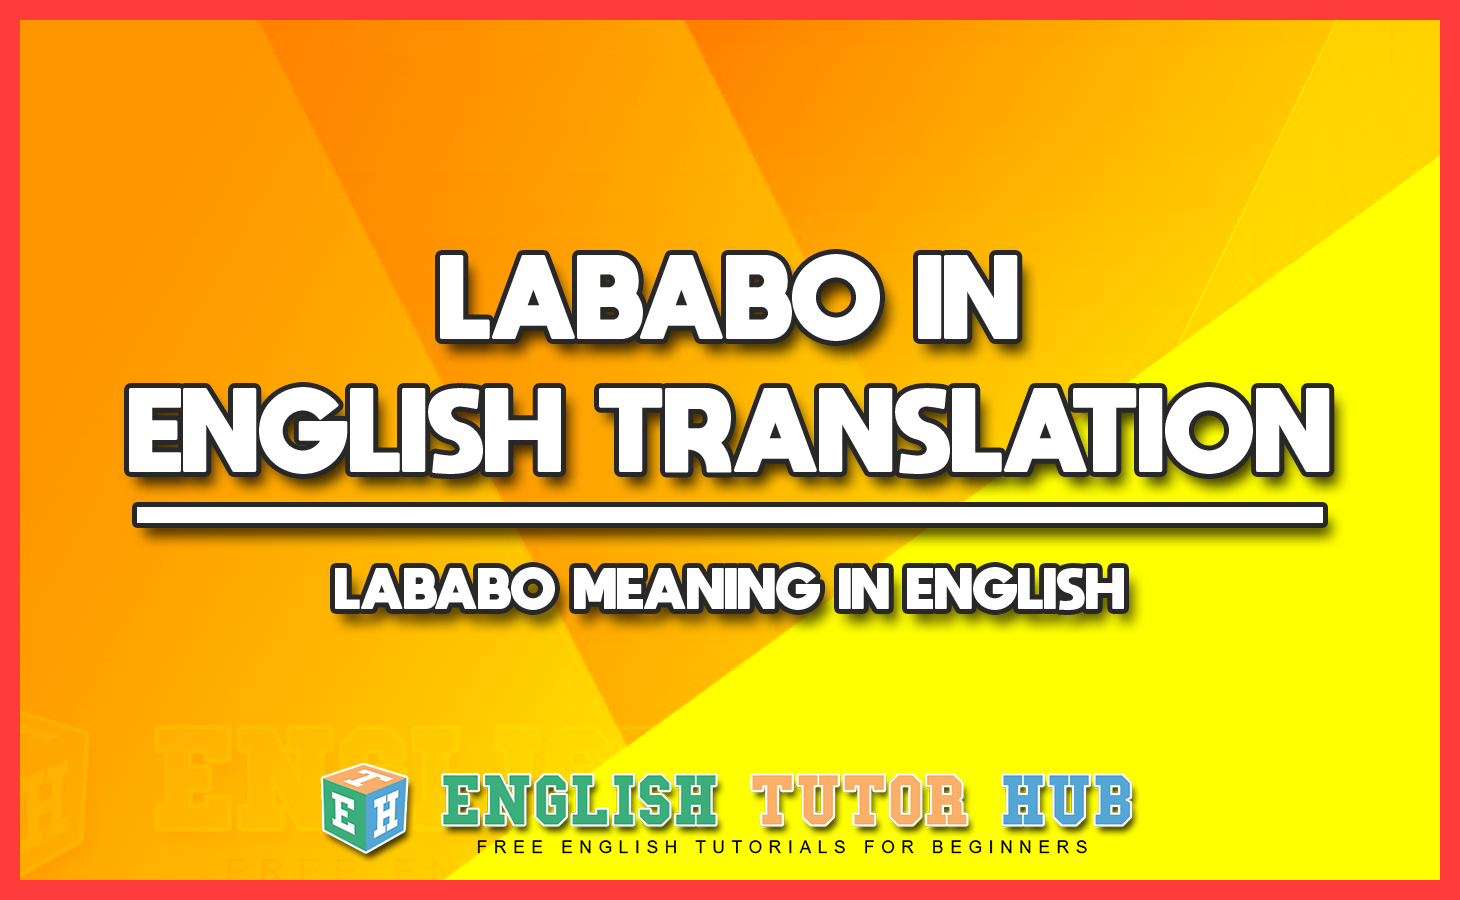 LABABO IN ENGLISH TRANSLATION - LABABO MEANING IN ENGLISH